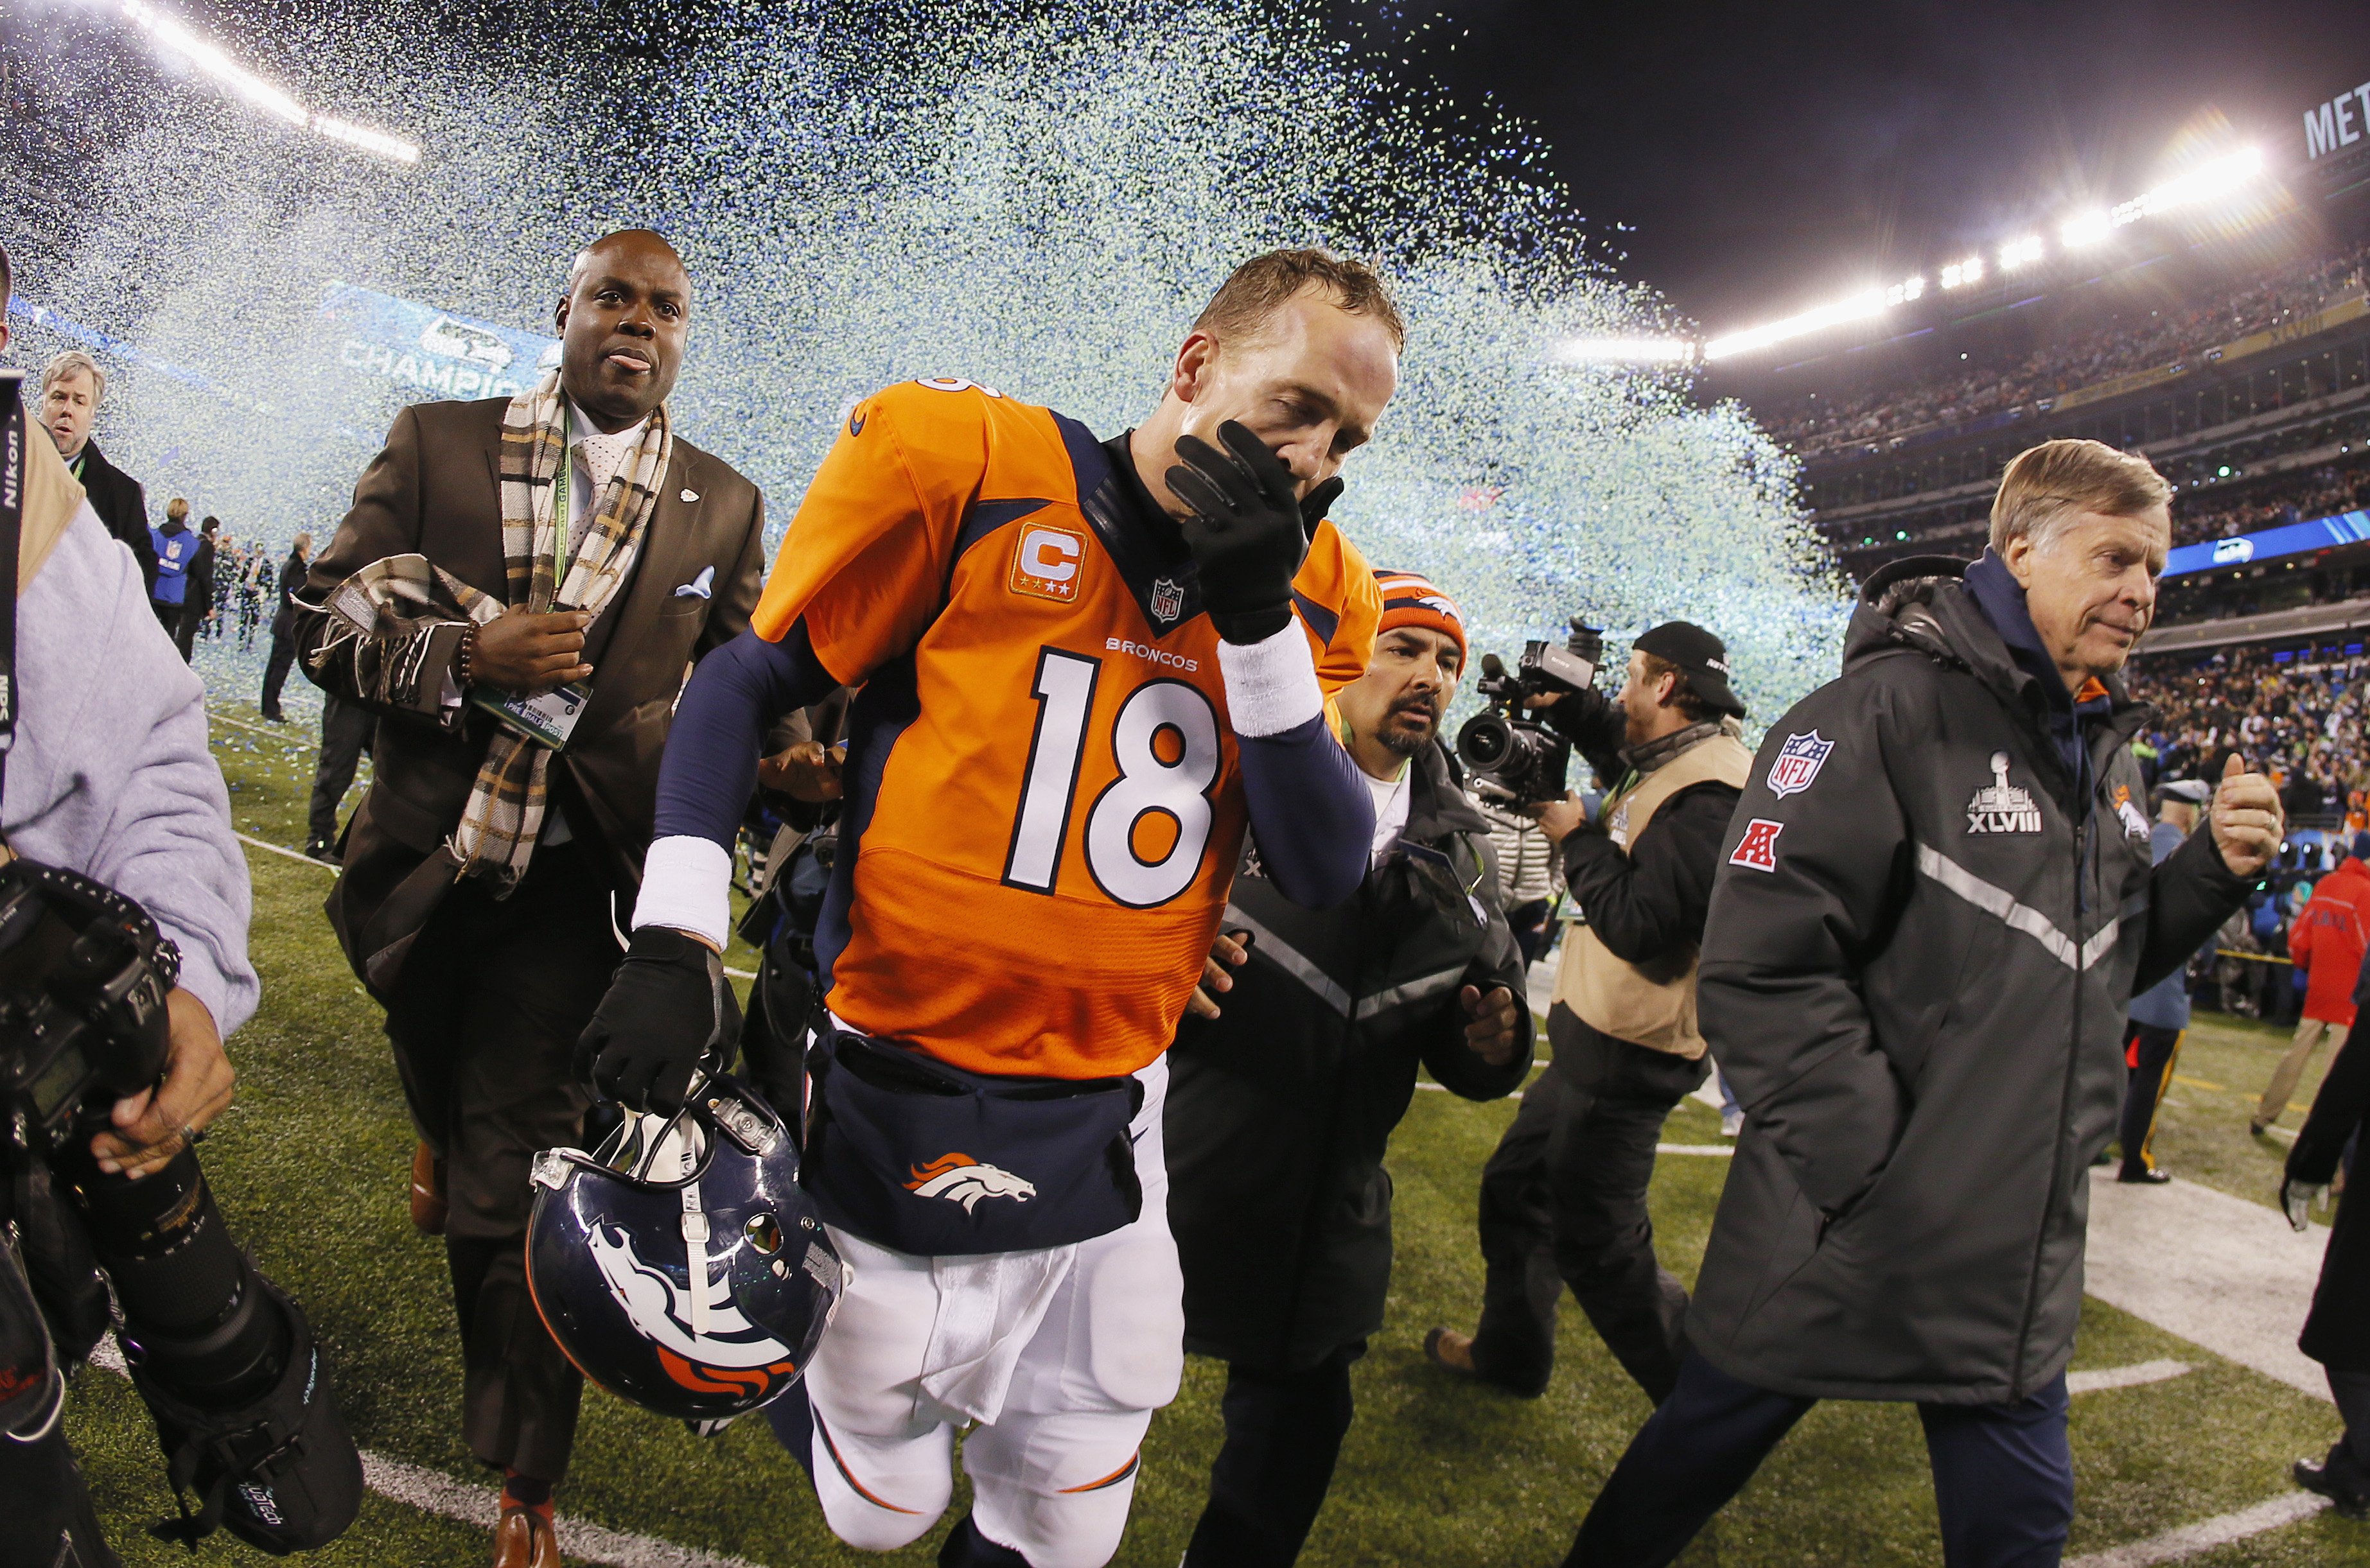 Quarterback Peyton Manning of the Denver Broncos reacts as he walks off the field after their 43-8 loss to the Seattle Seahawks during Super Bowl XLVIII. (Kevin C. Cox / Getty Images)